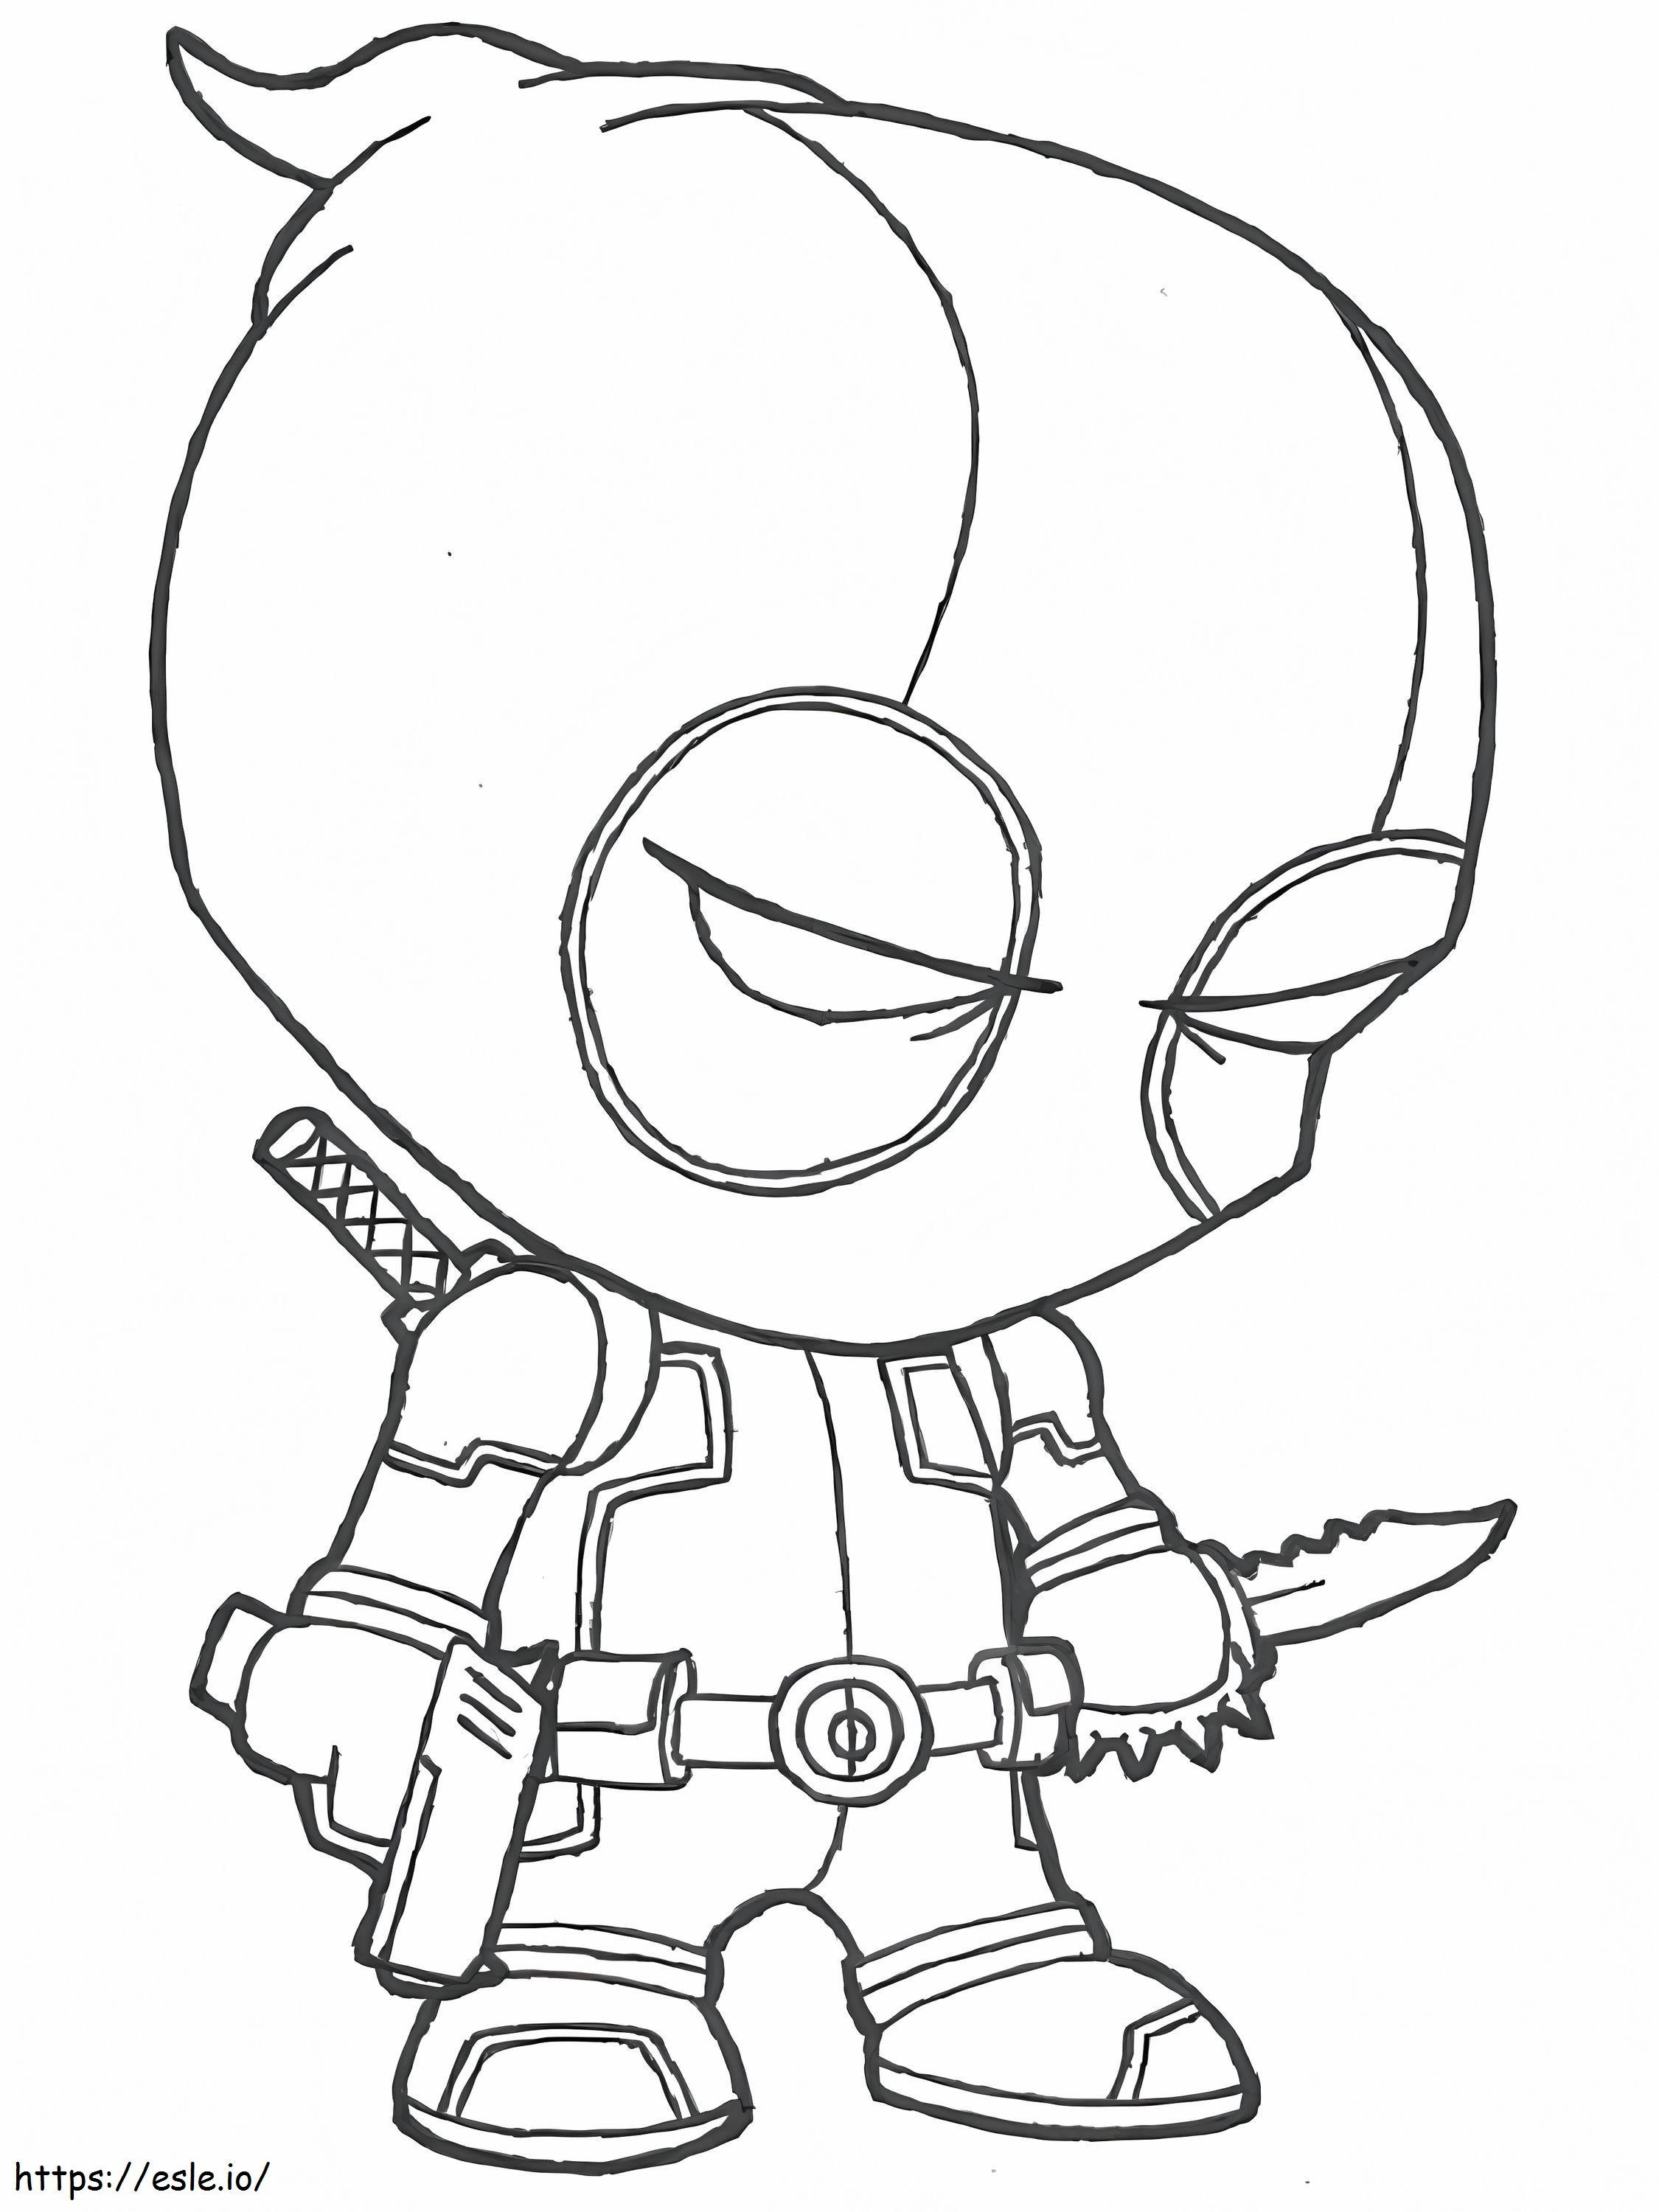 Chibi Deadpool With Gun And Knife coloring page